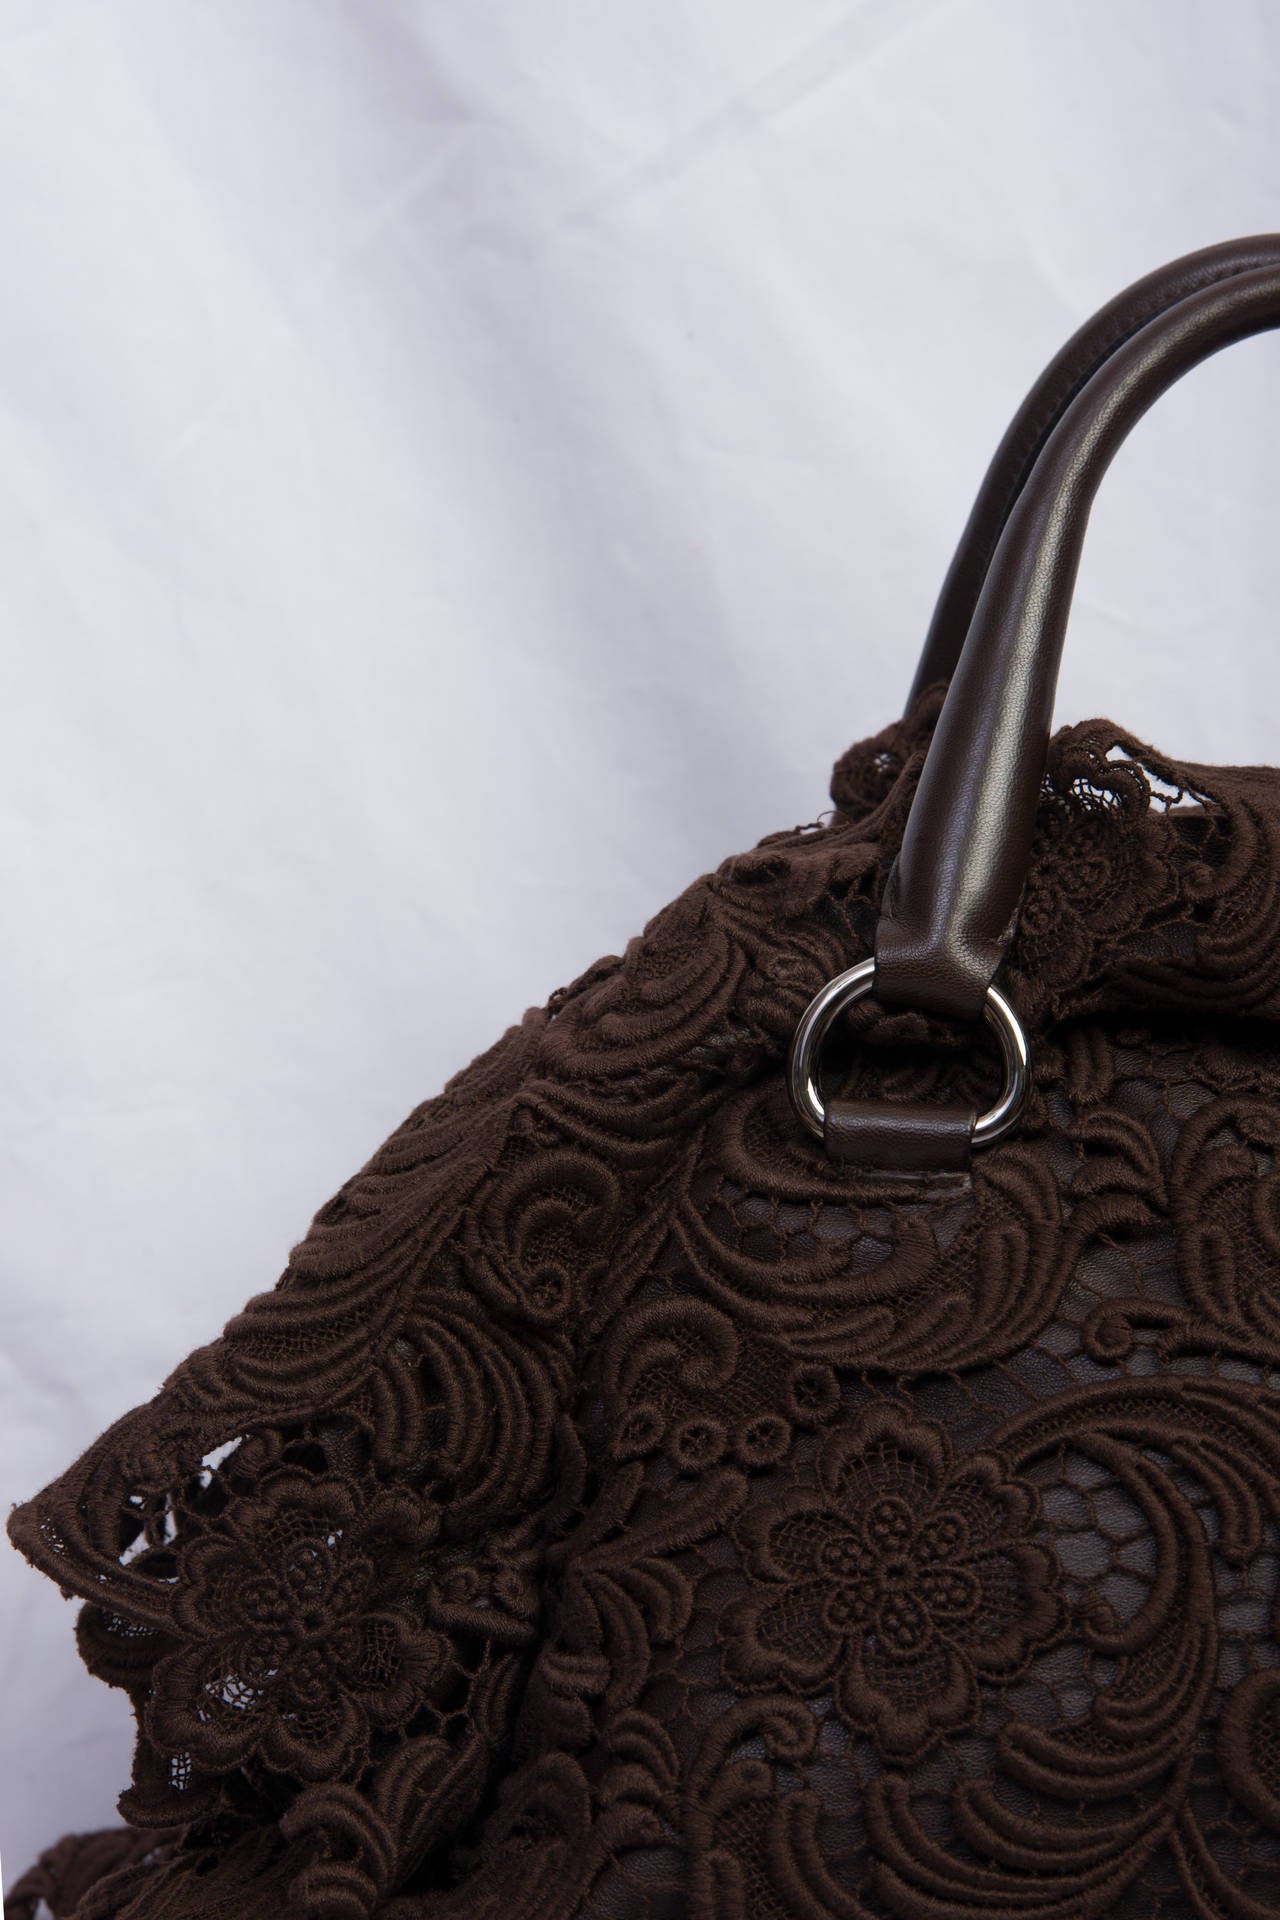 2007s Prada Pizzo Lace Covered Leather Bowling Bag in Brown.